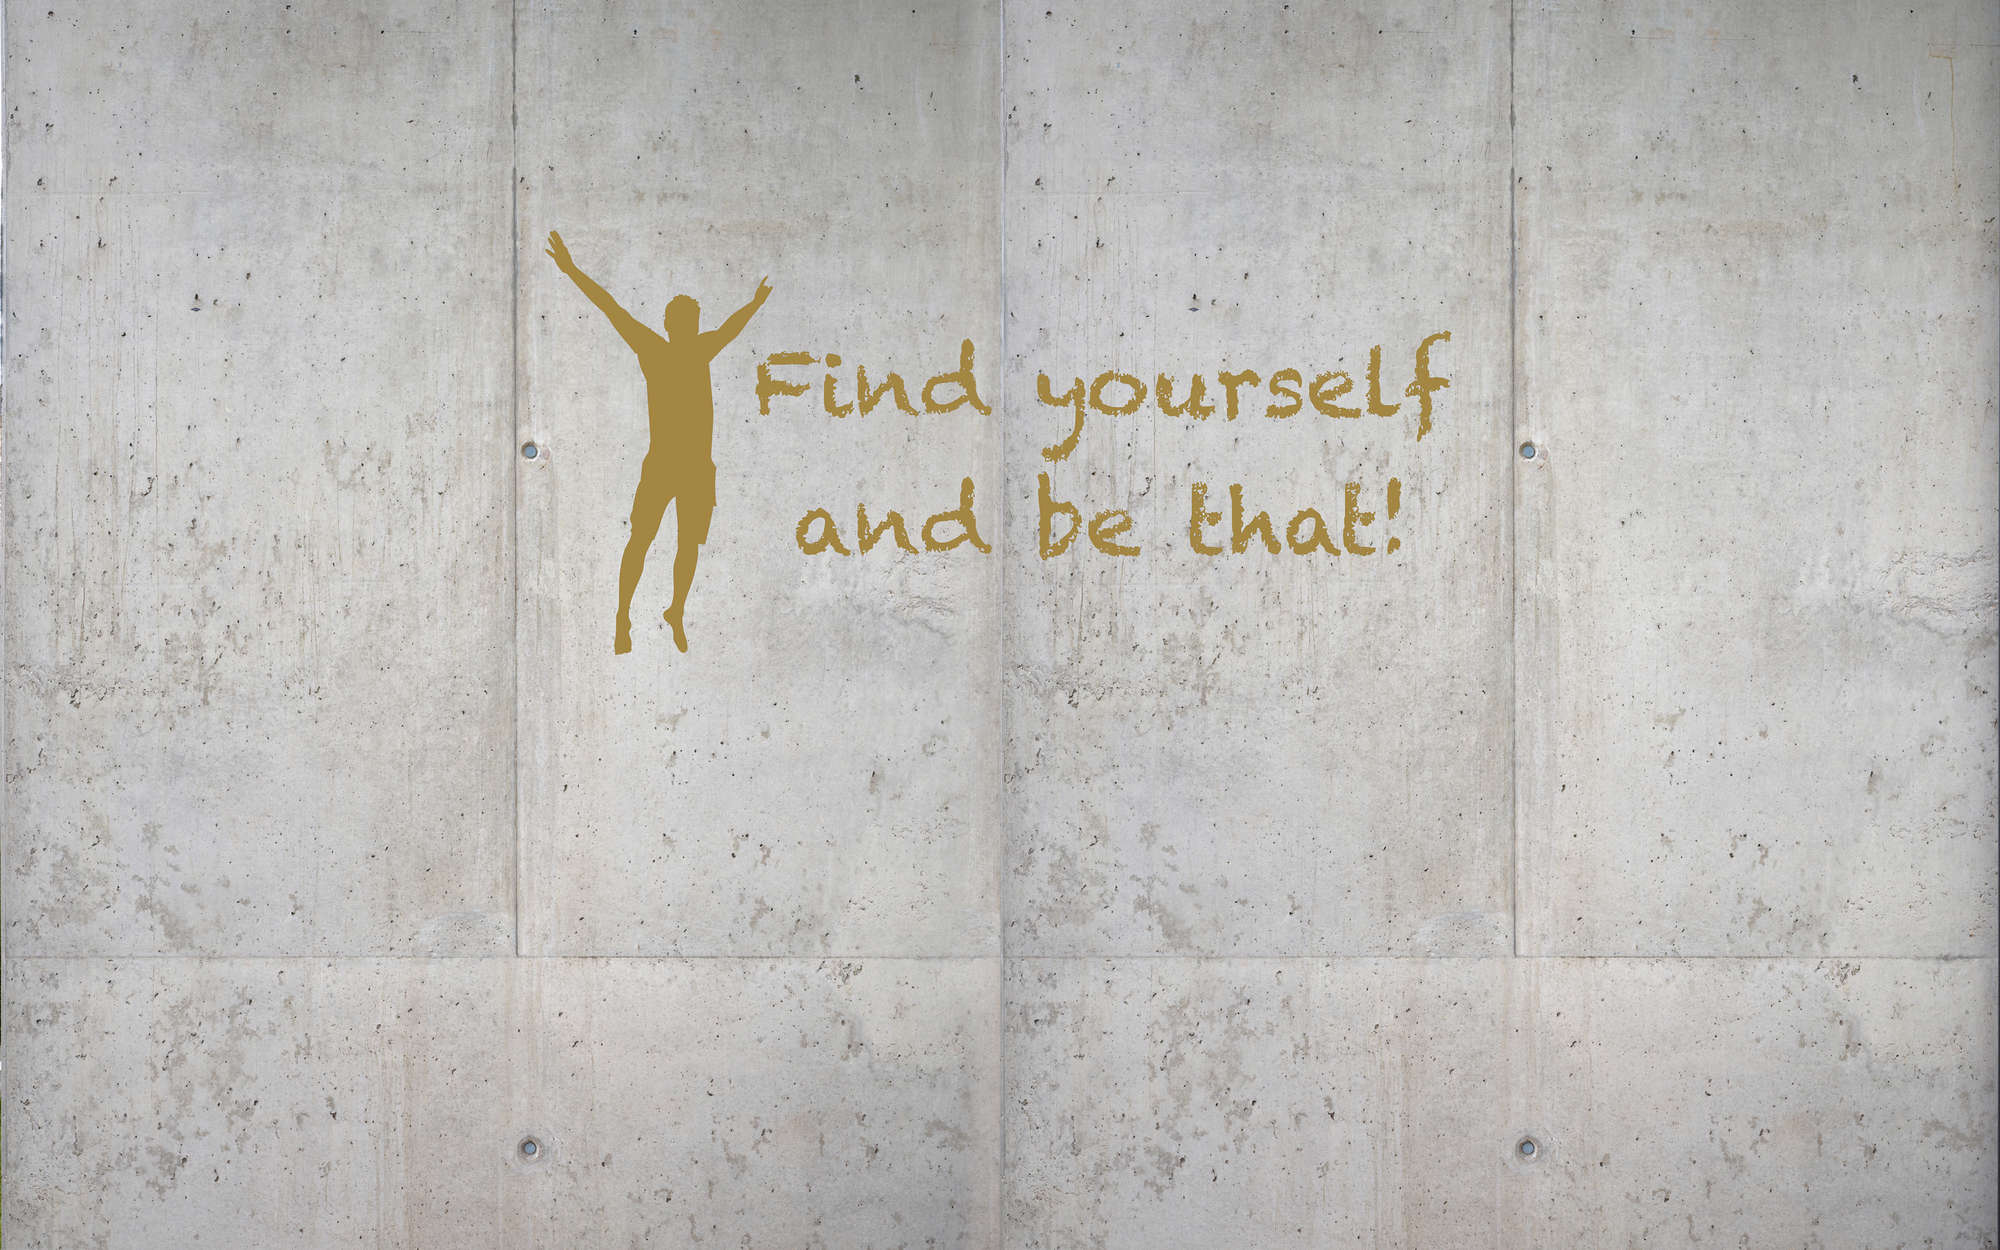             Concrete wall mural with lettering - Premium smooth fleece
        